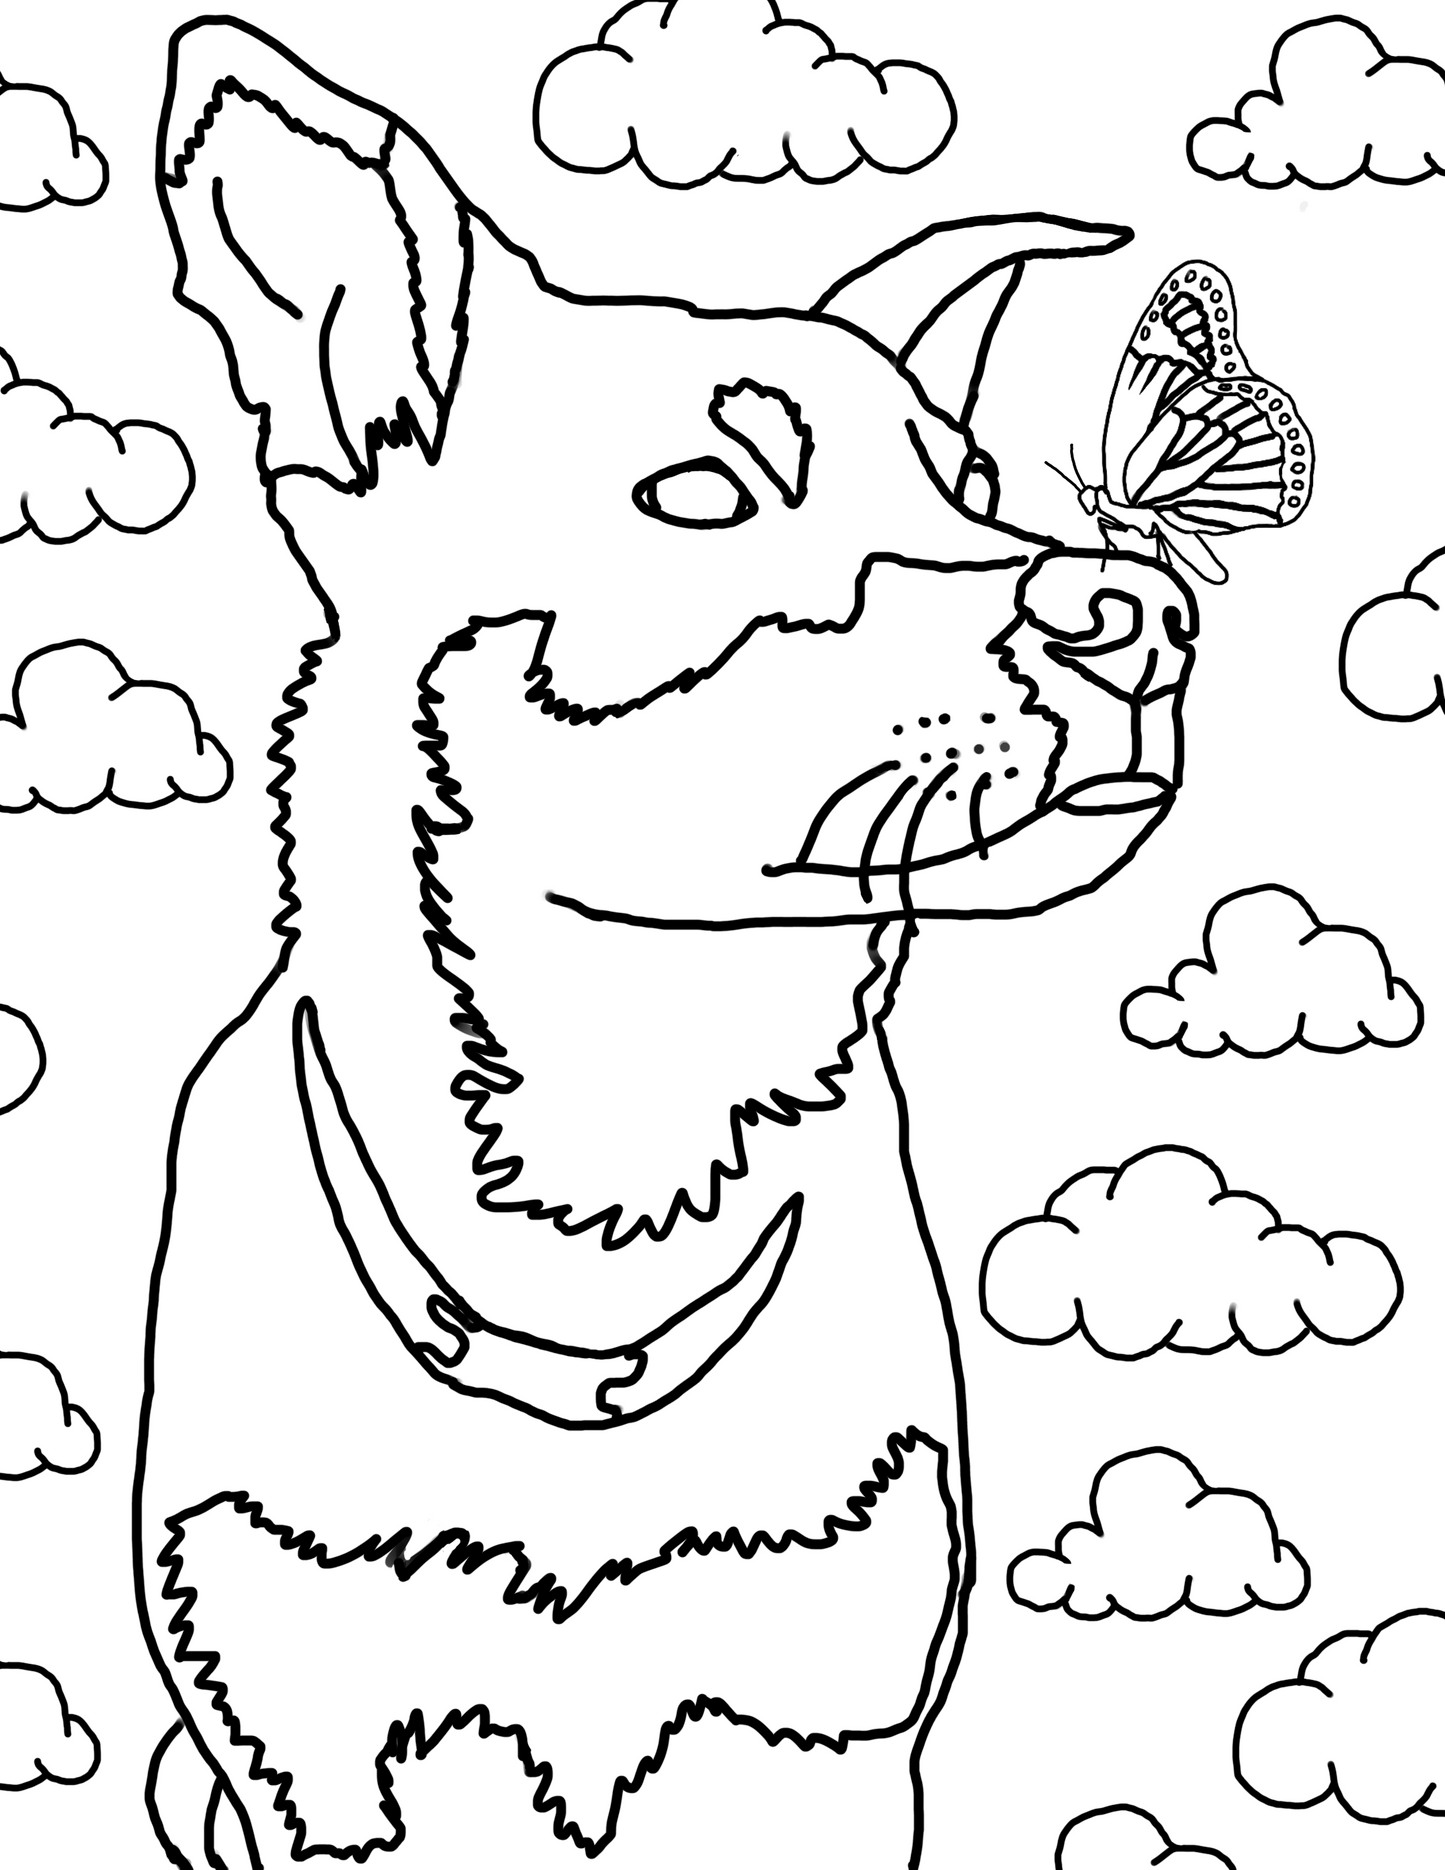 The Good Dog Coloring book